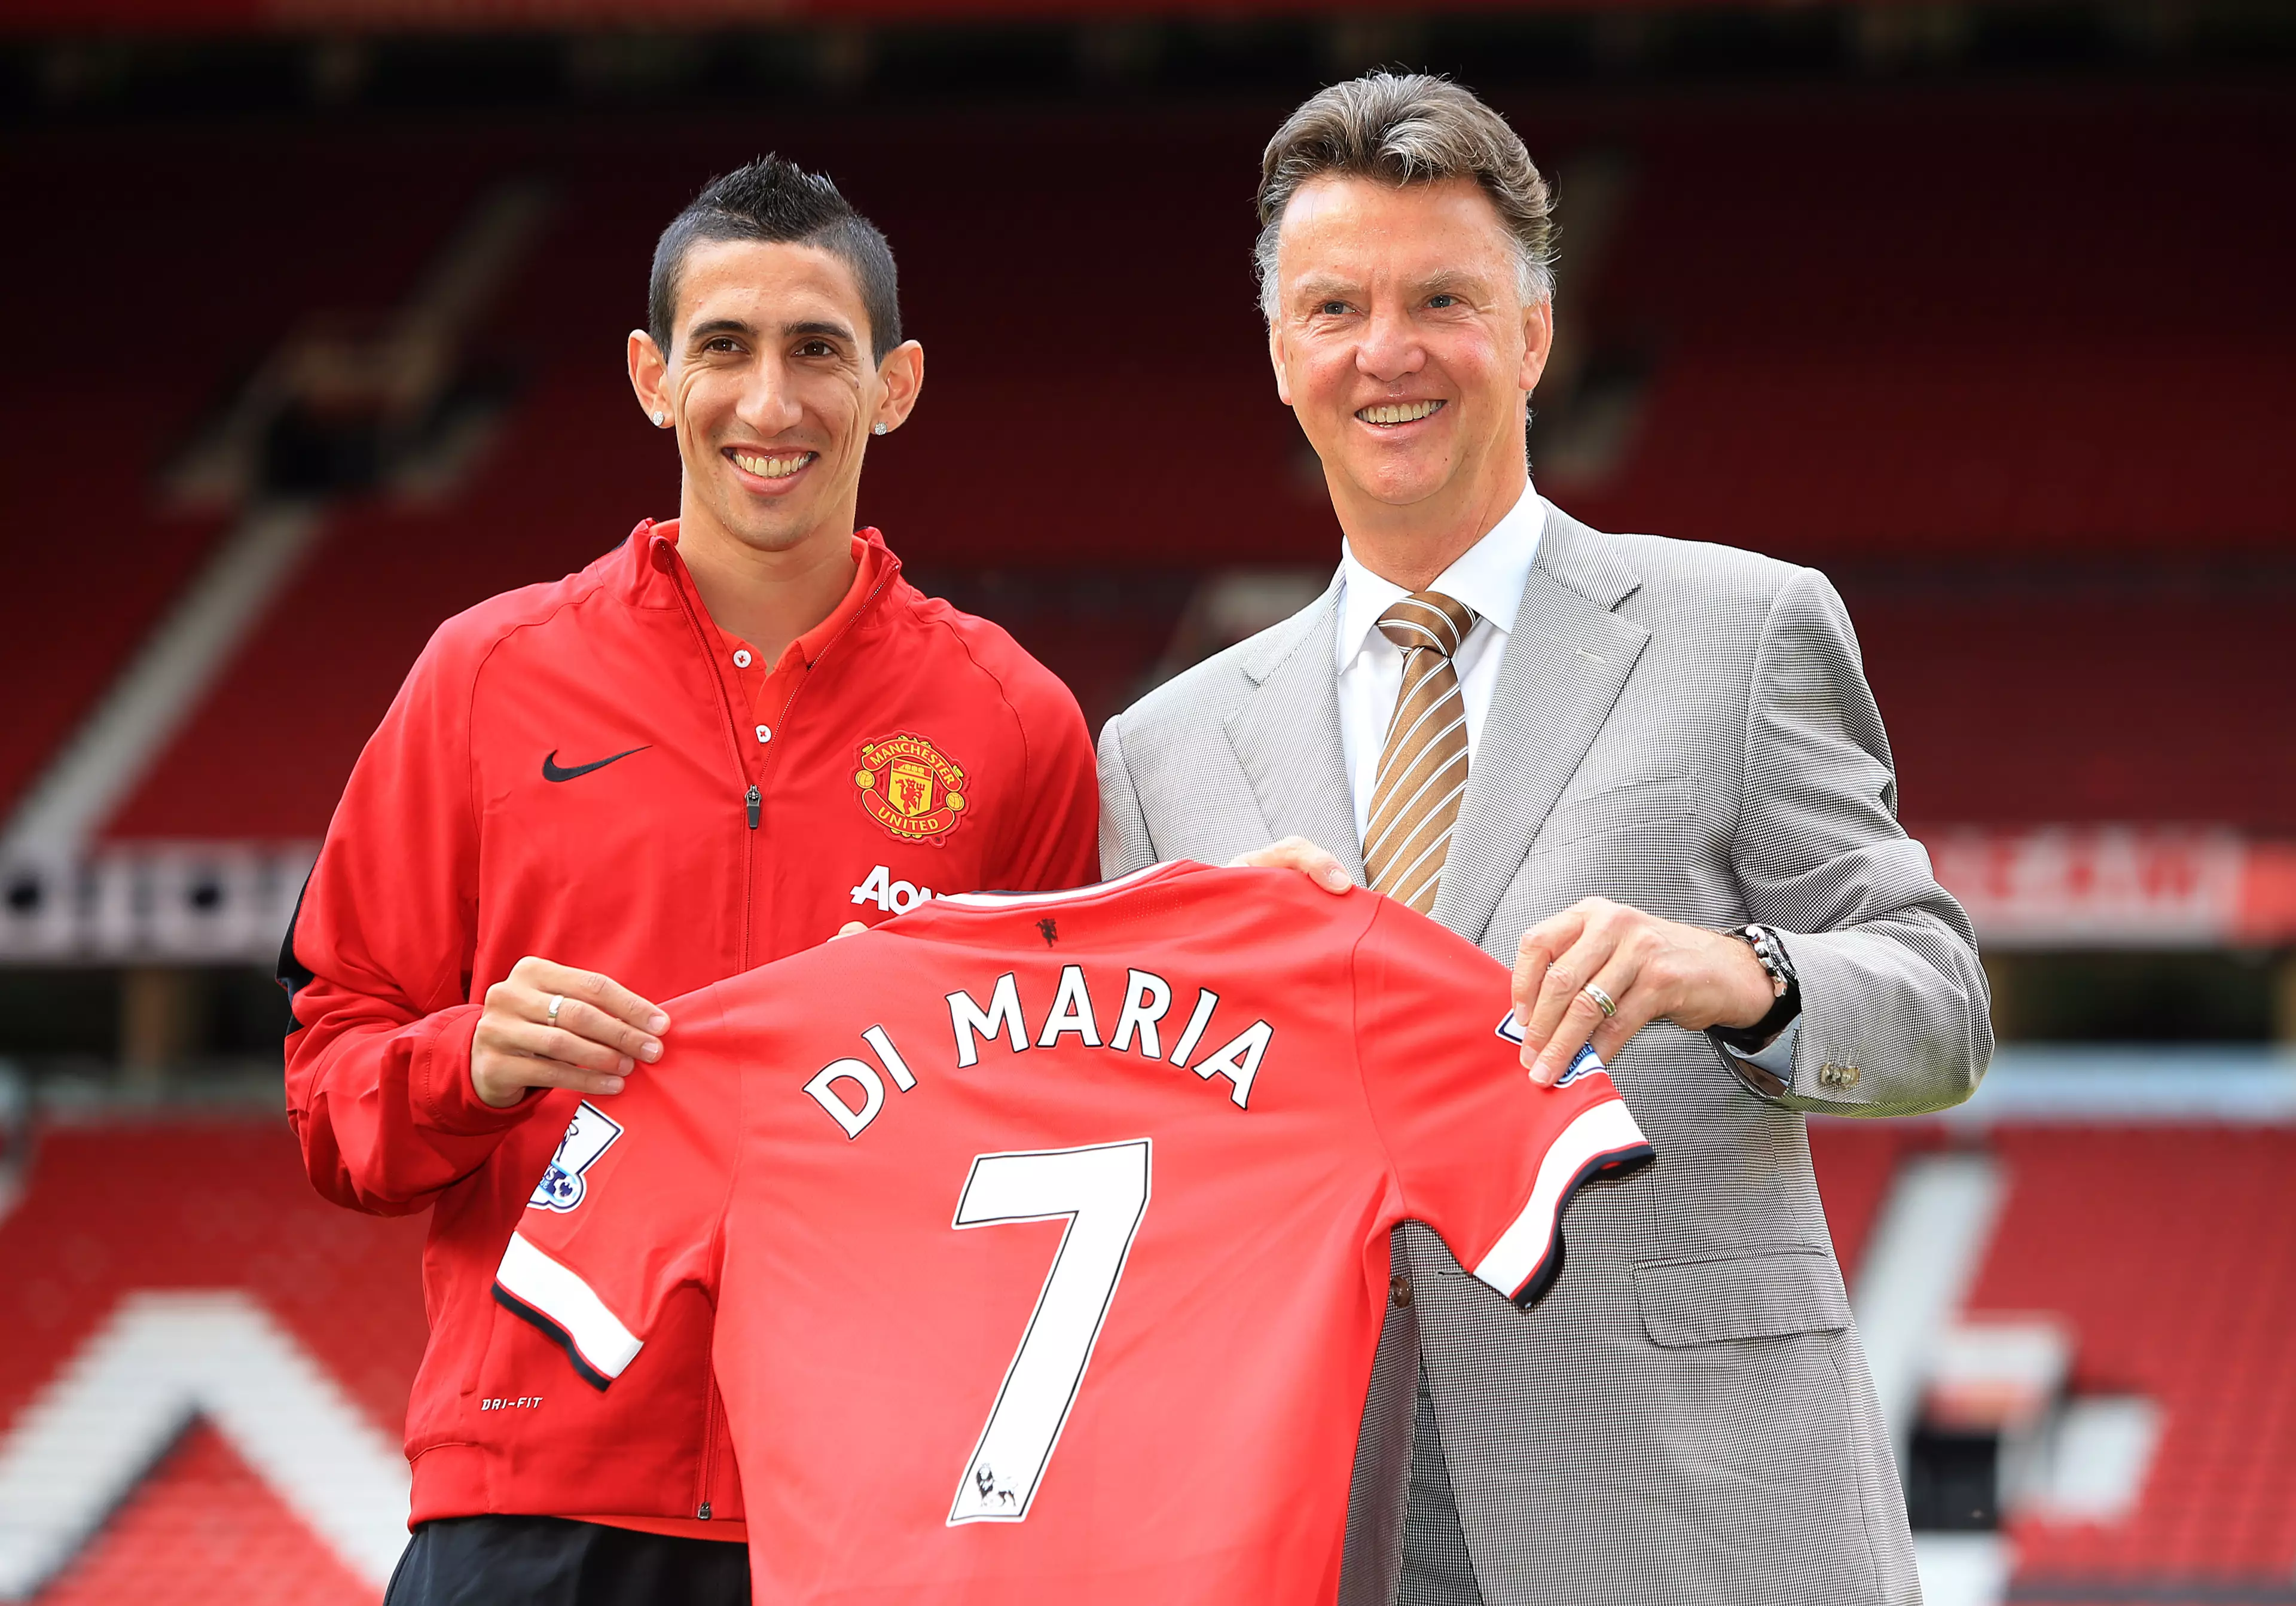 Di Maria flopped at United after costing £59.7 million, a then British record. Image: PA Images